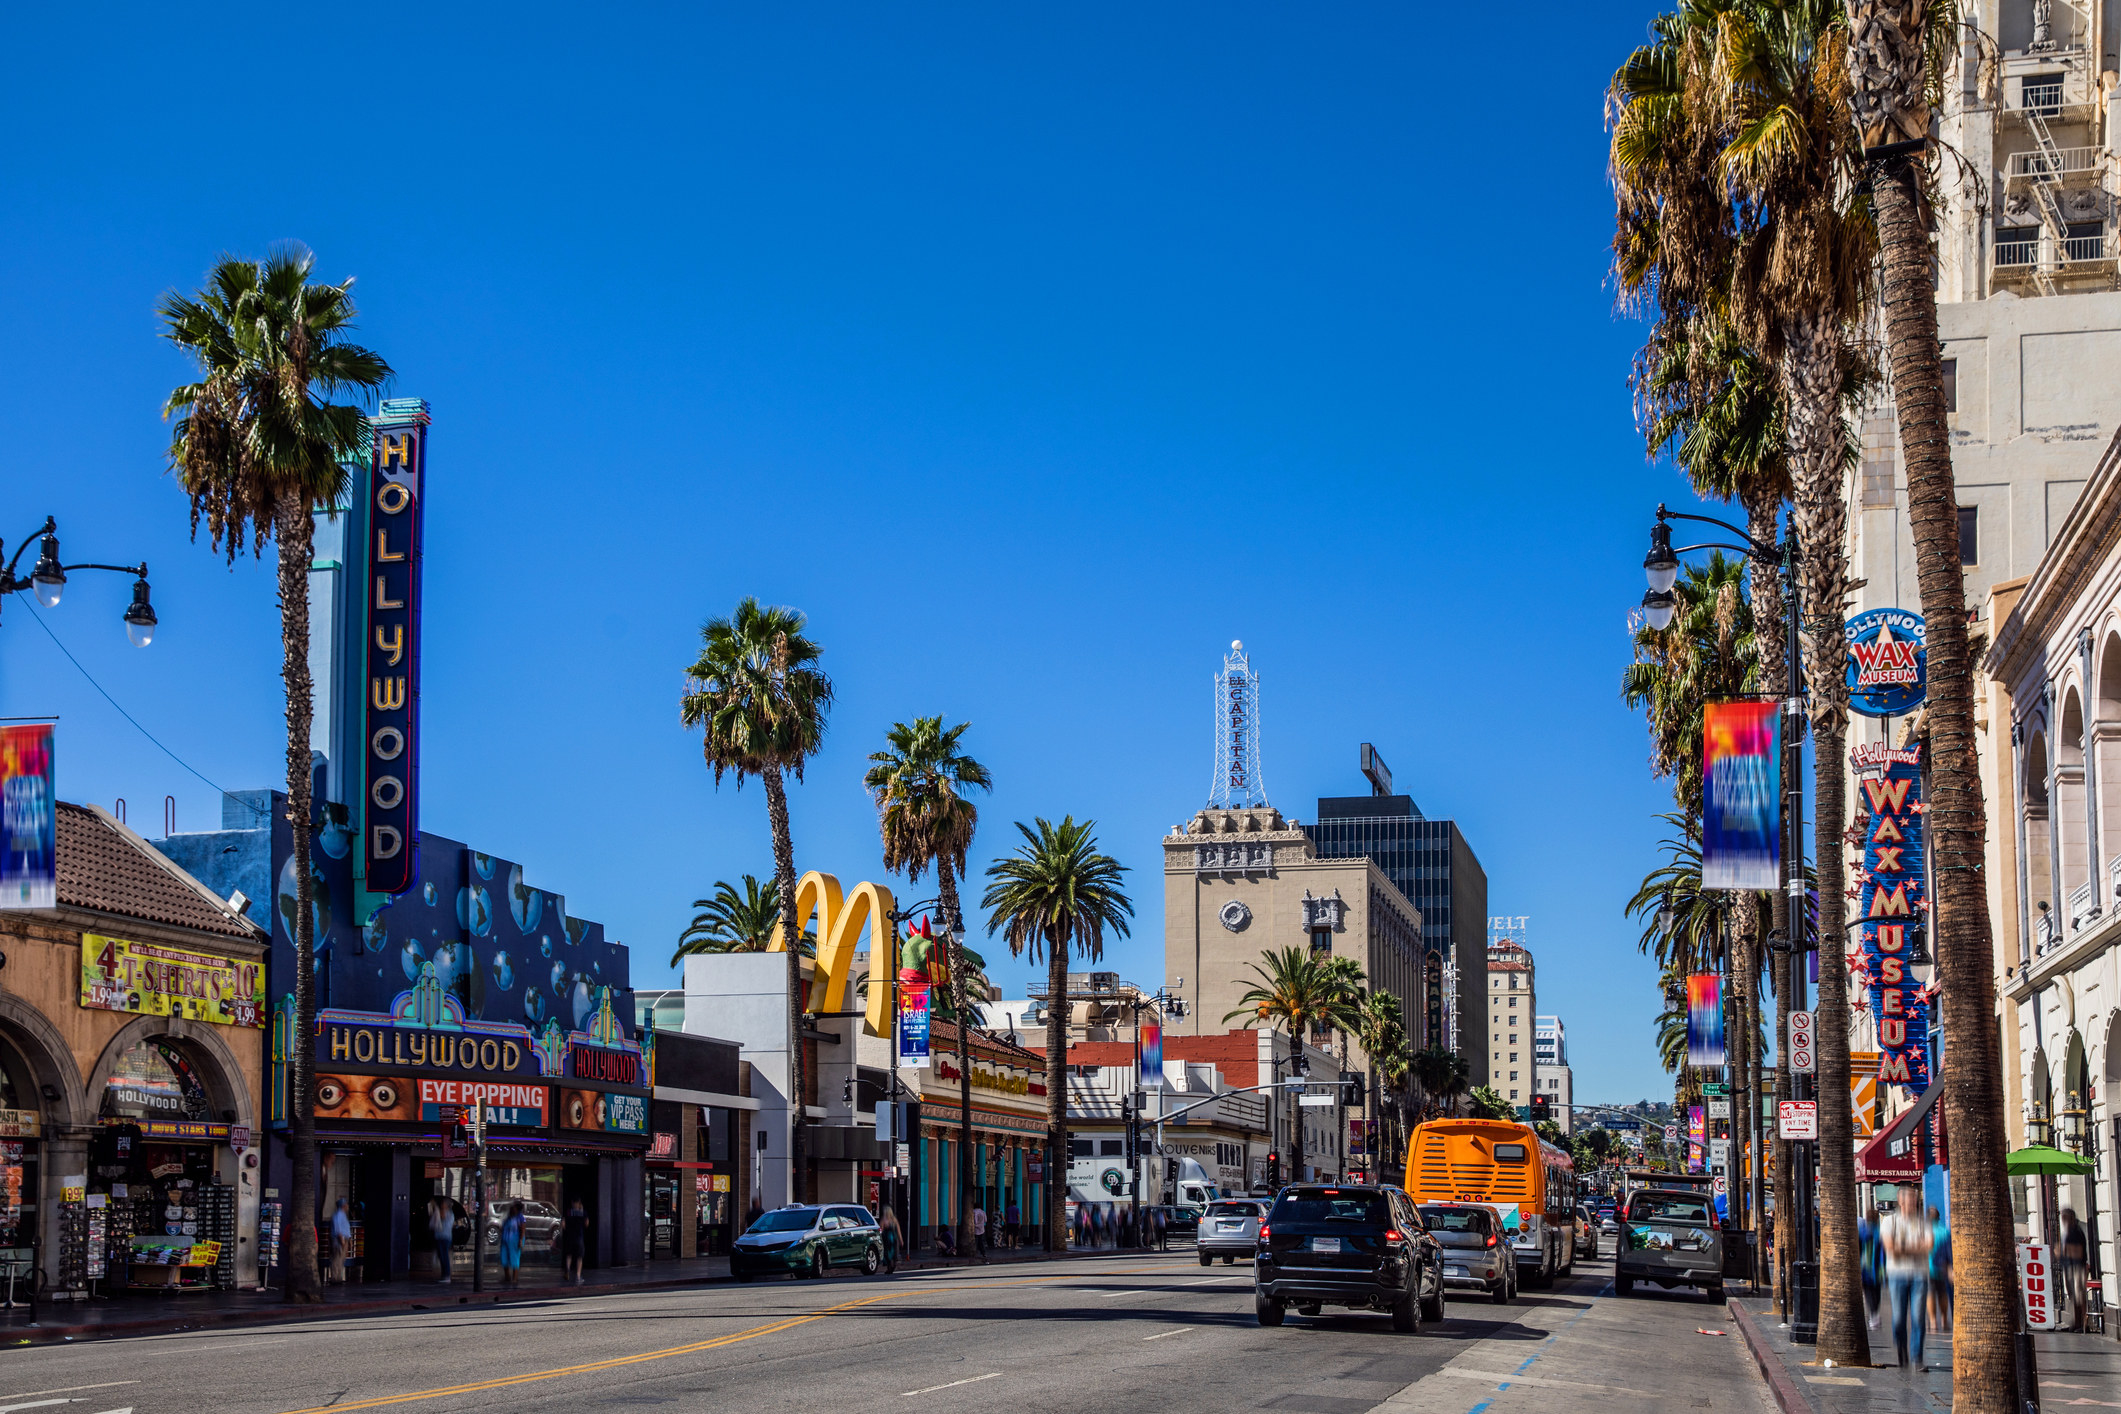 A view down Hollywood Boulevard near the Roosevelt Hotel